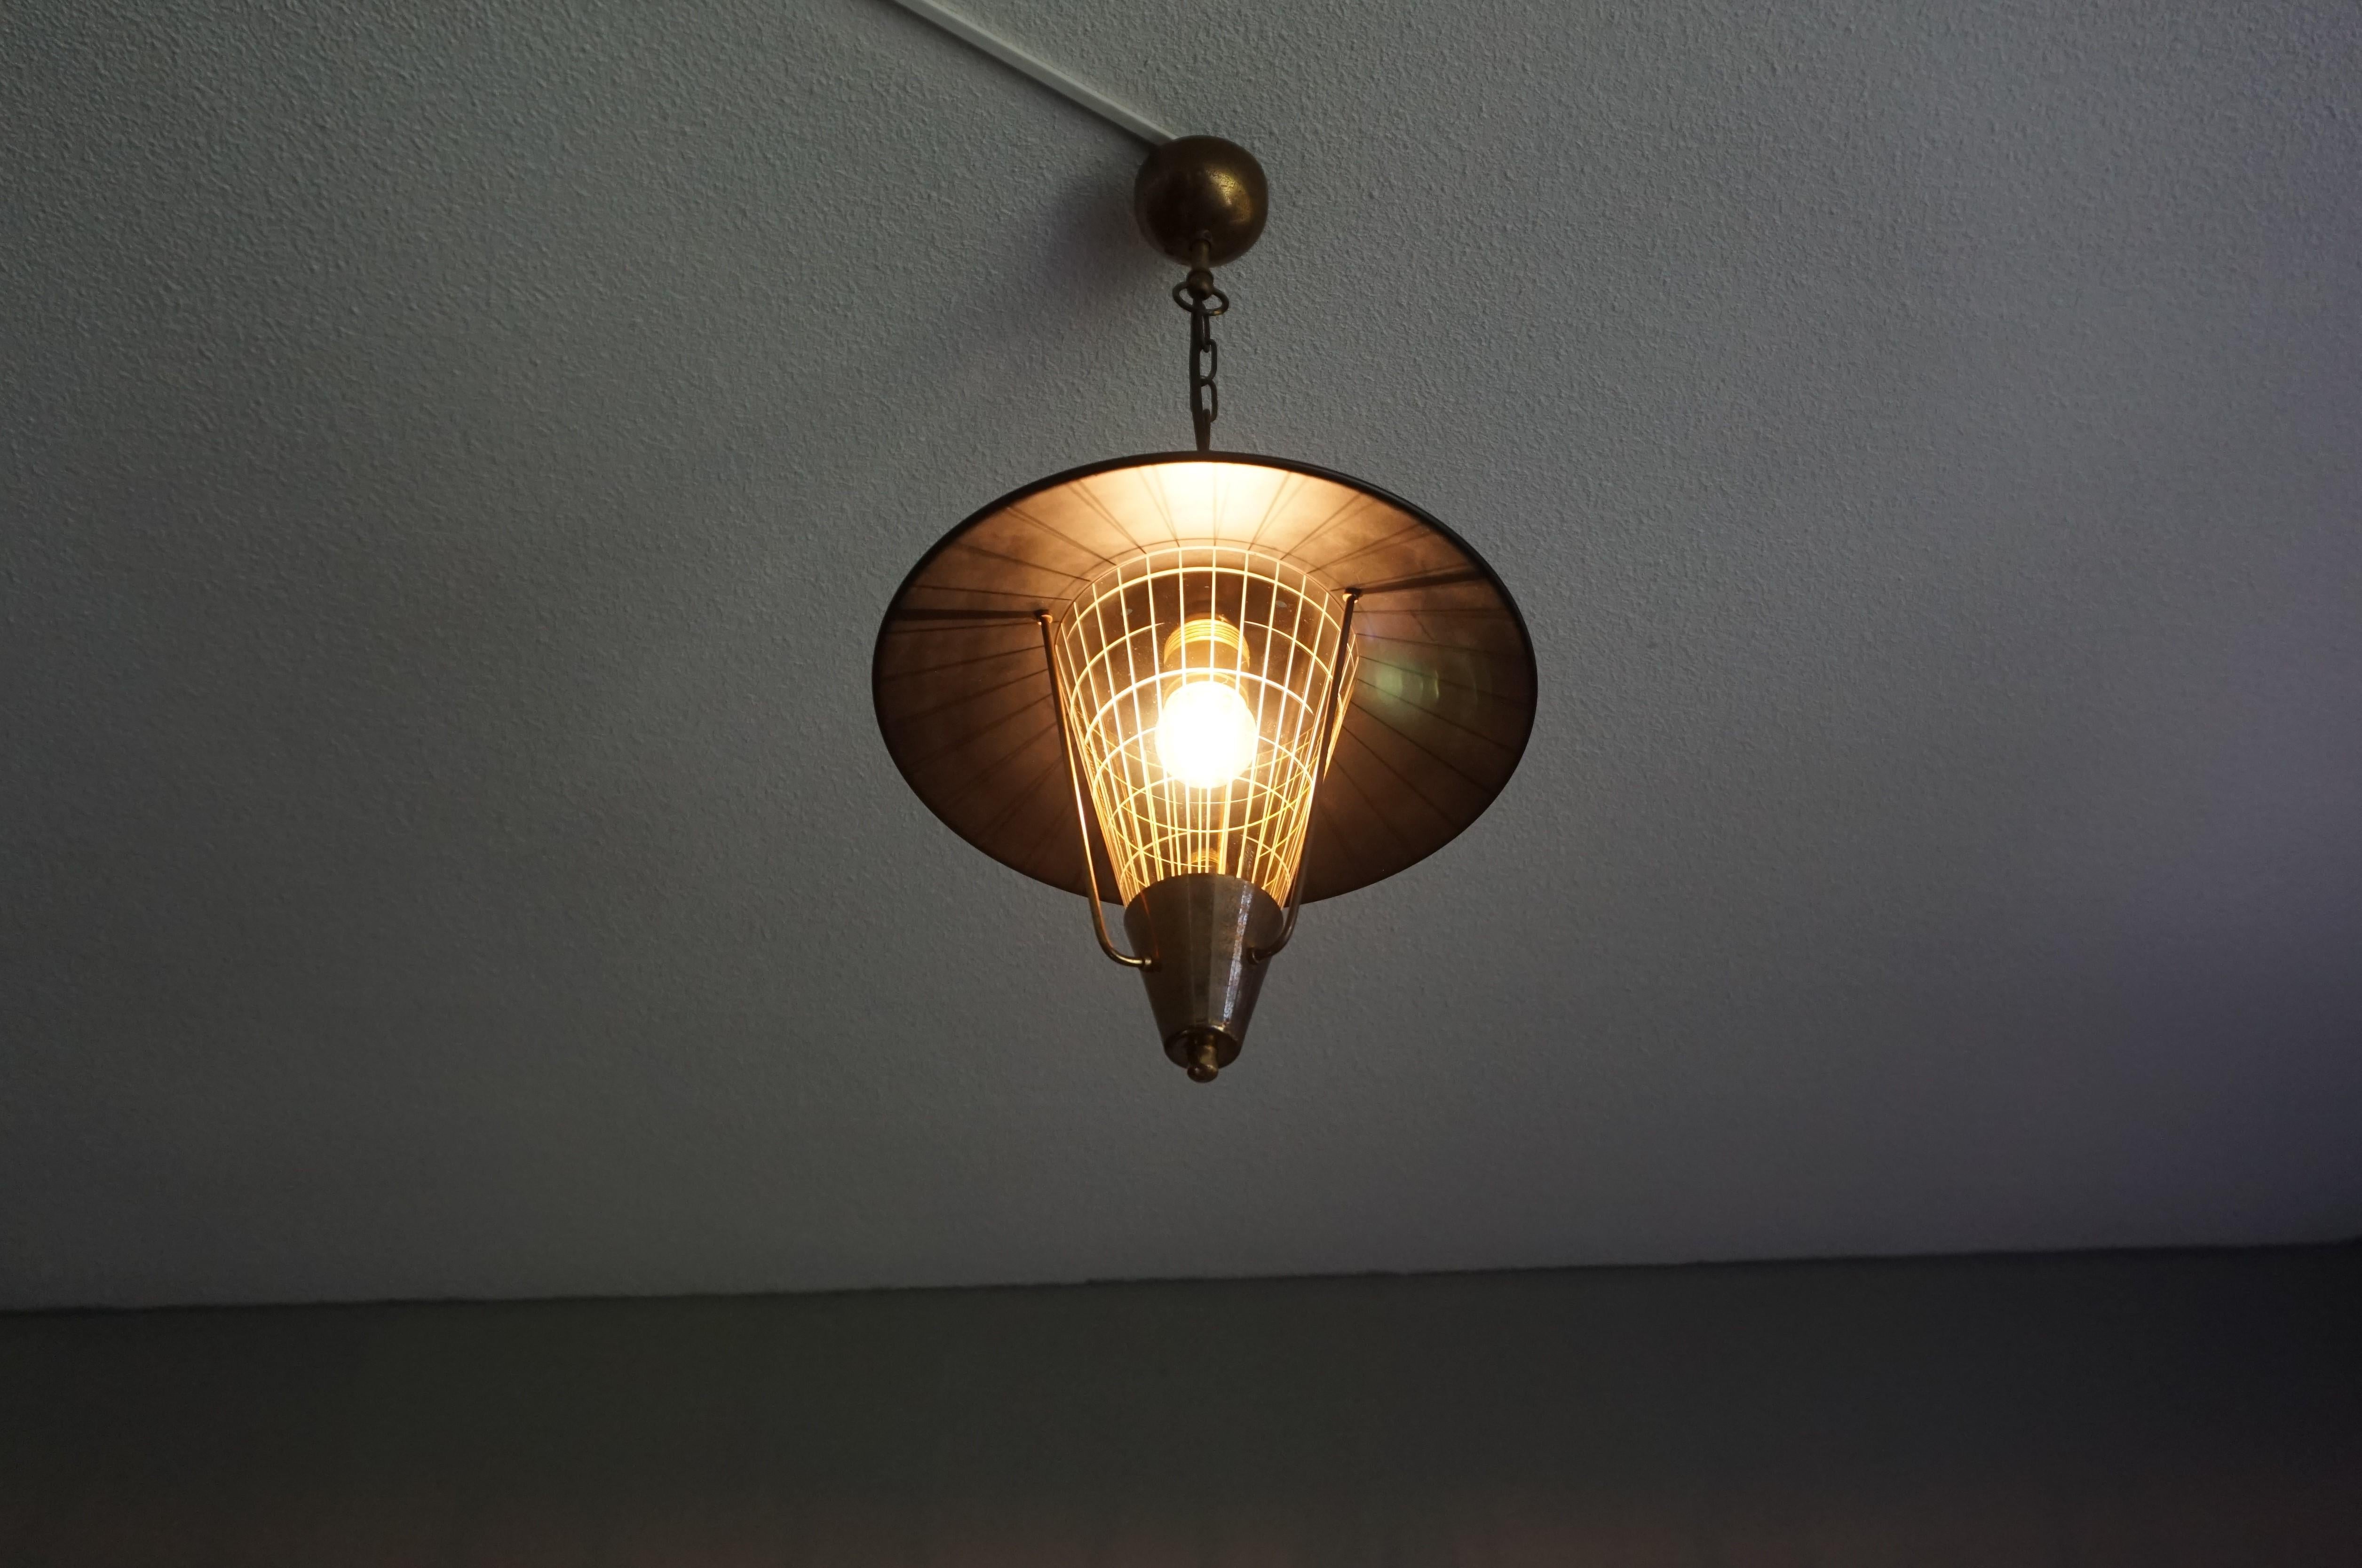 Superb condition and beautiful, midcentury modernist ceiling lamp.

We don't know which designer created this midcentury work of lighting art, but we can see why this unique fixture would perfectly complement the interior of a mid-century hallway,